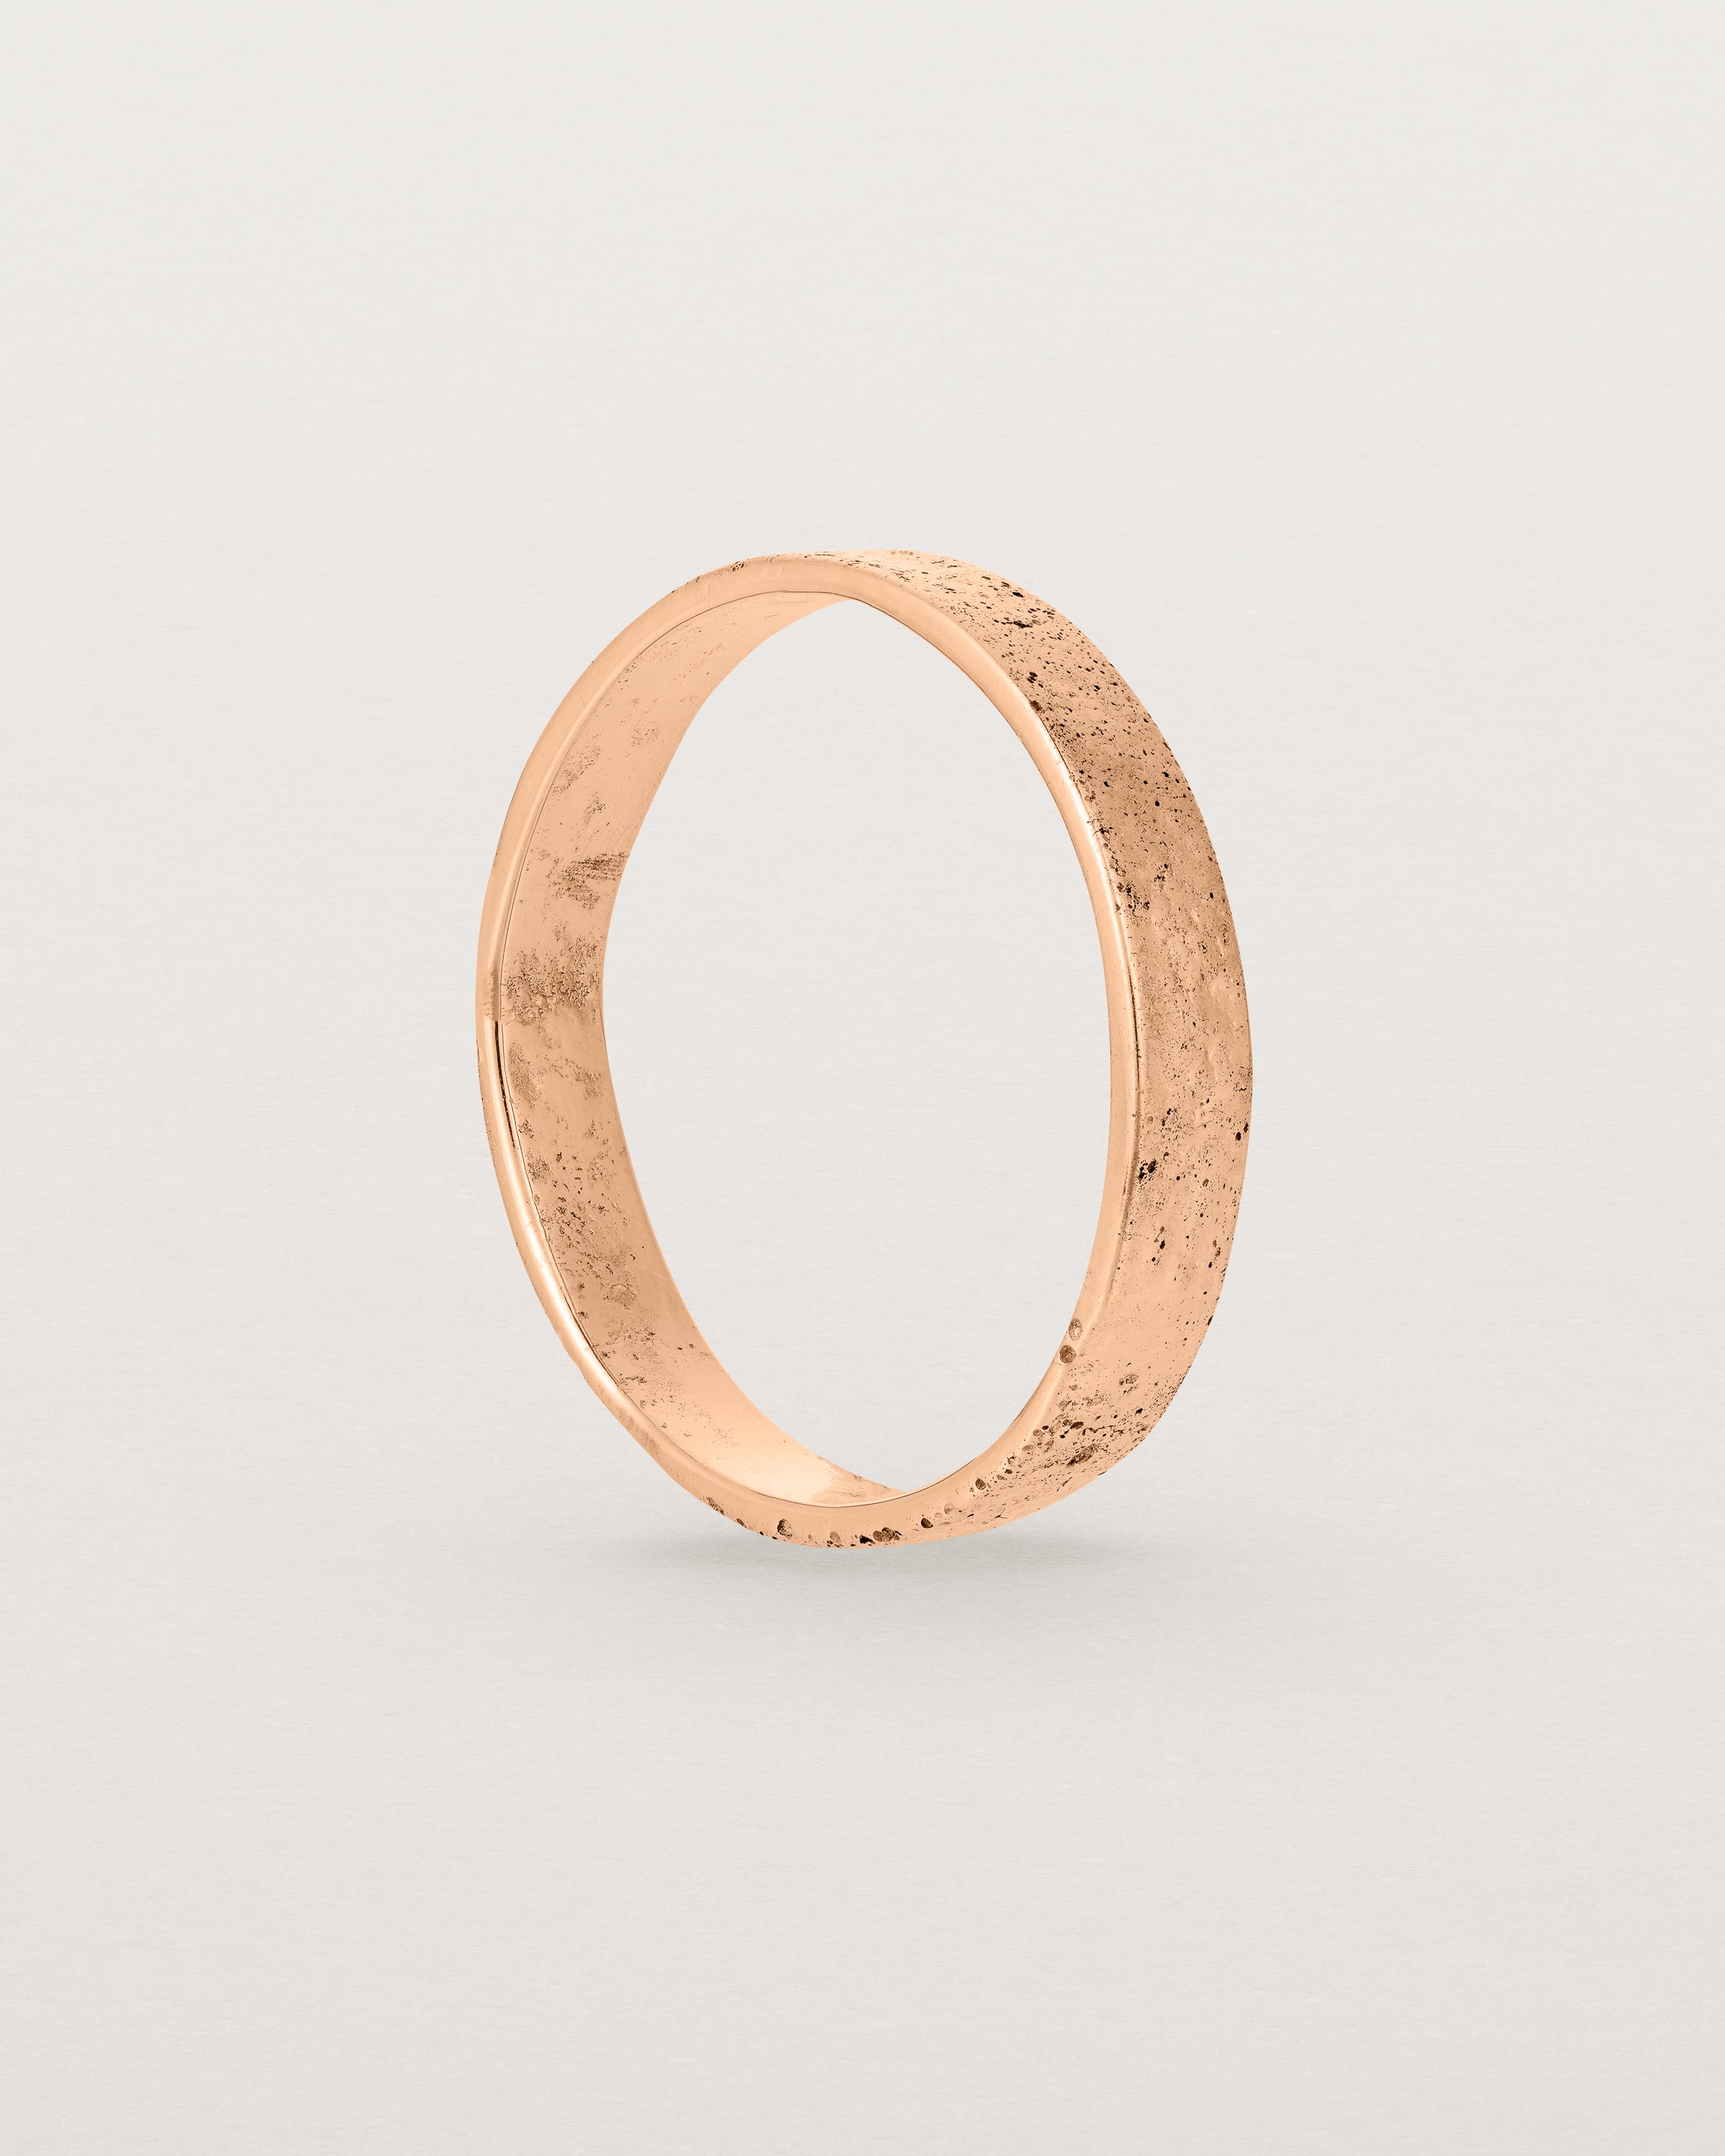 Standing view of the Naum Stacking Ring in Rose Gold.